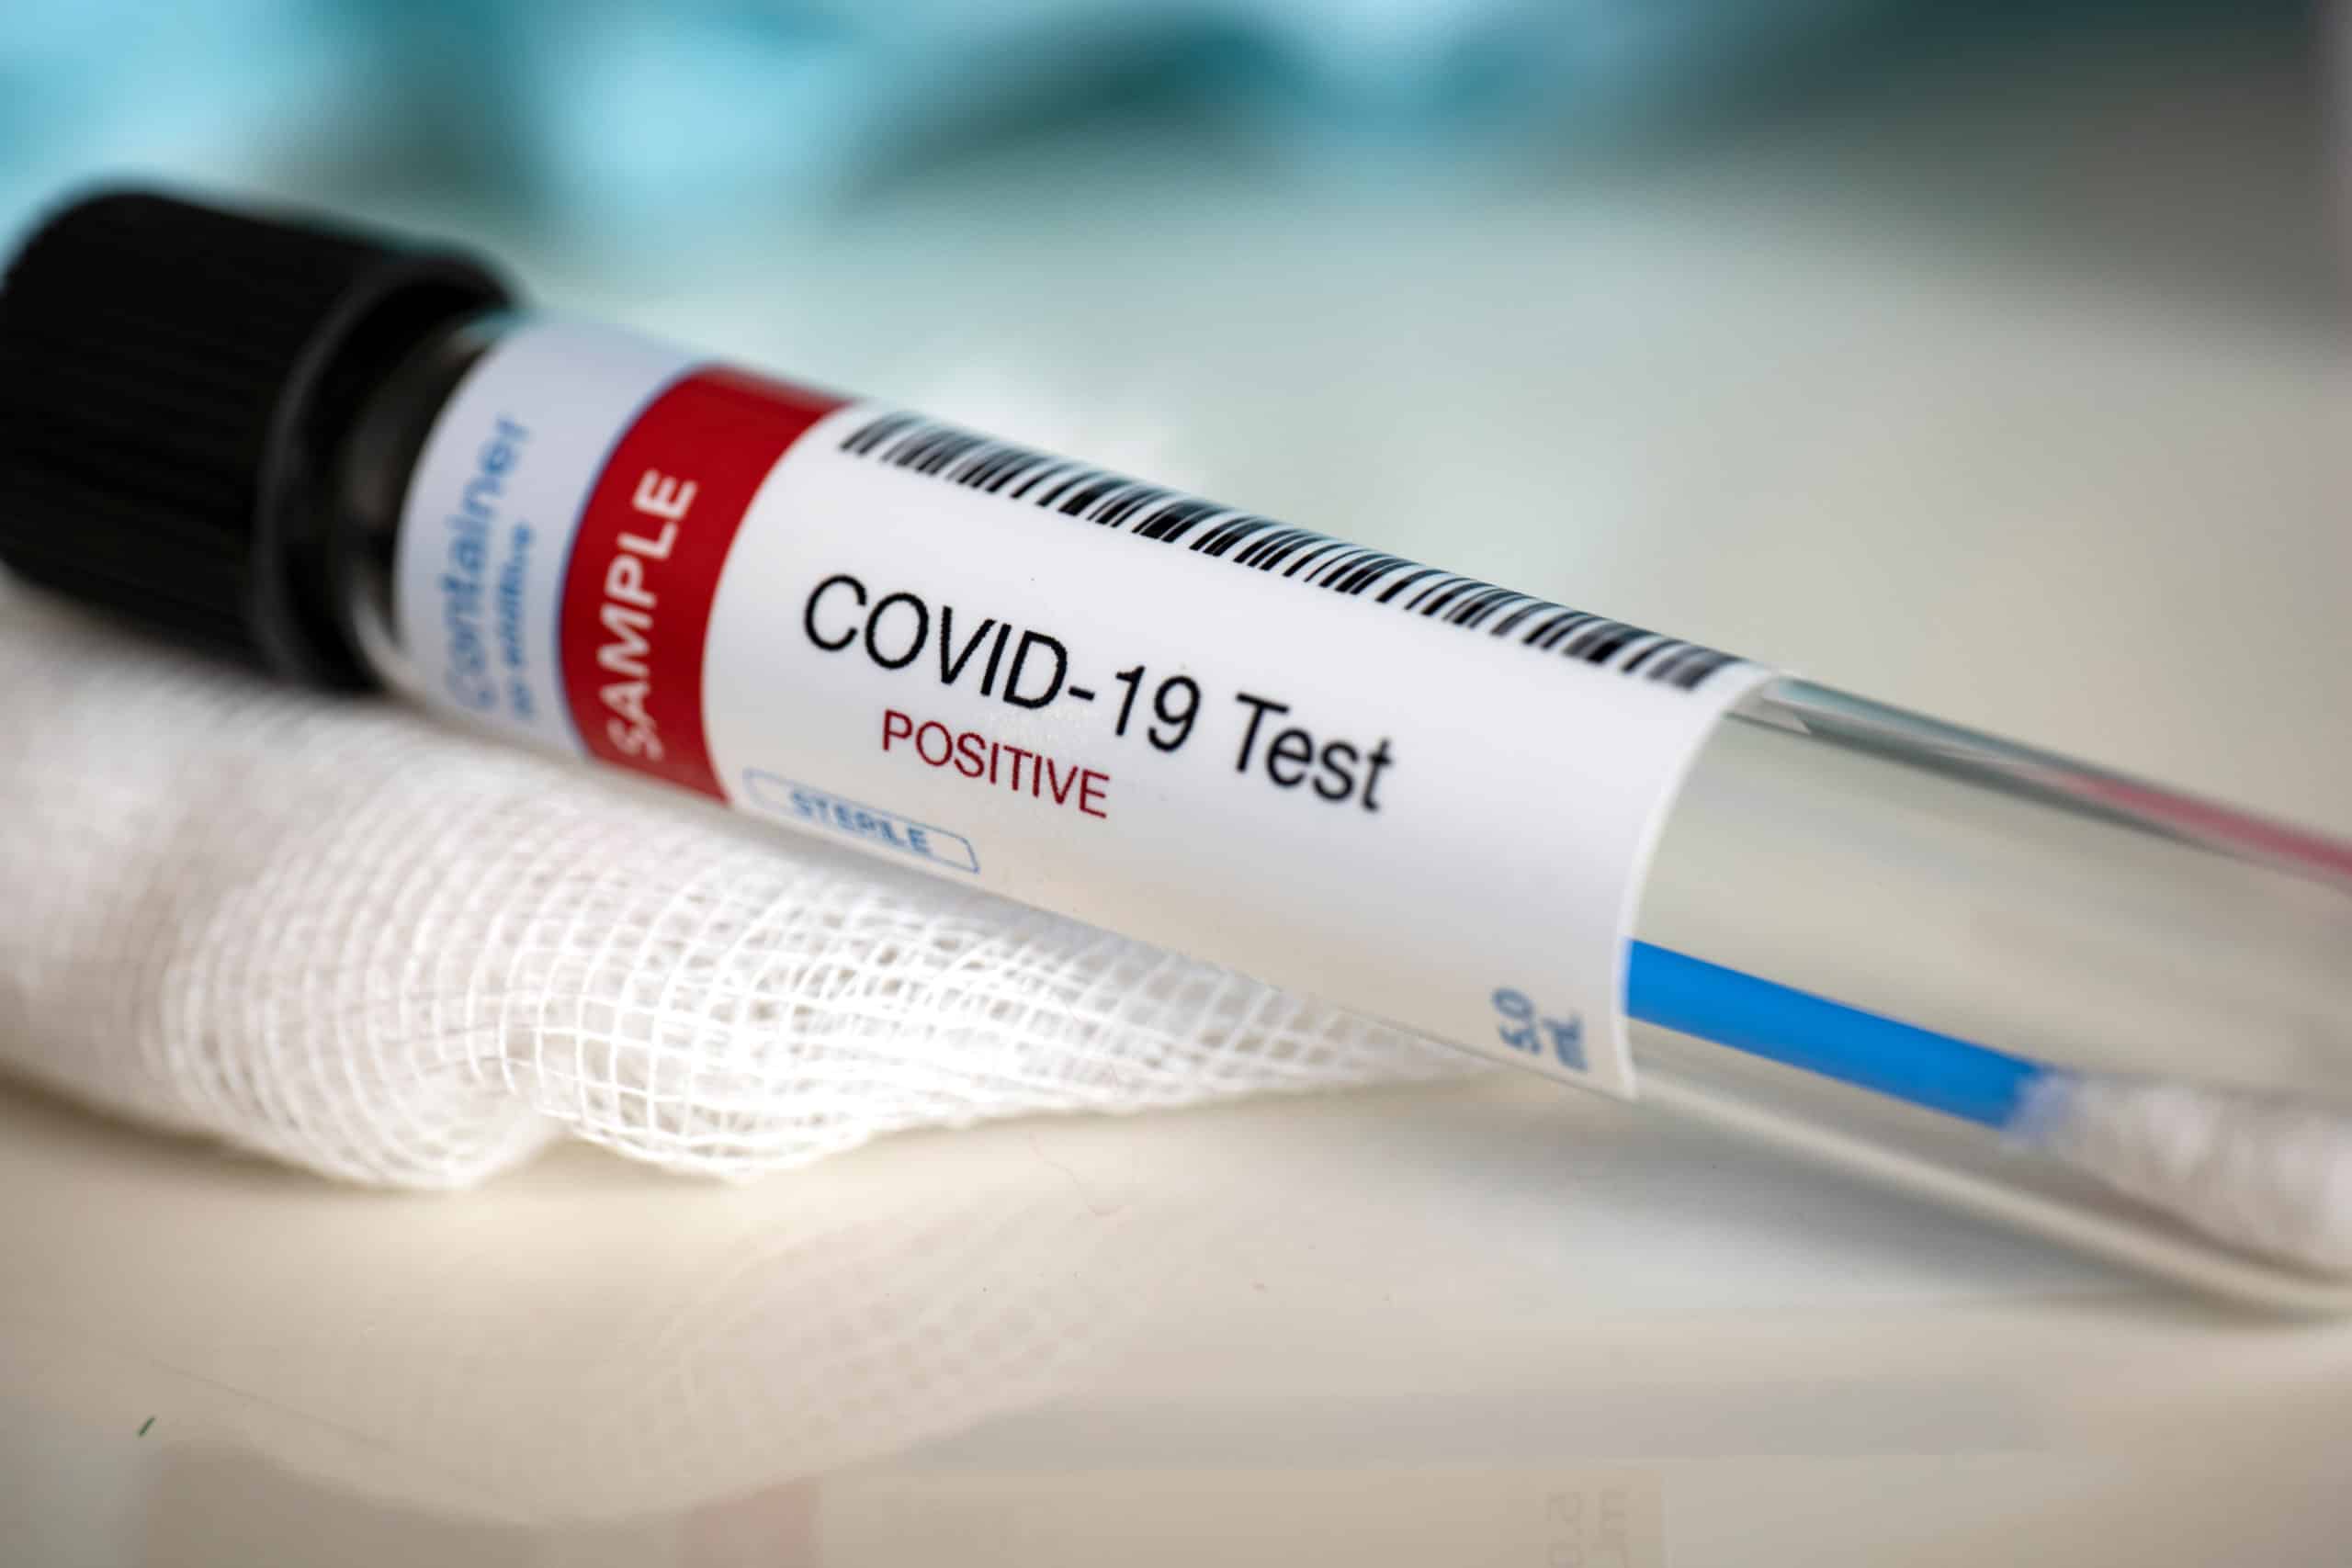 What to Do When an Employee Tests Positive for COVID-19